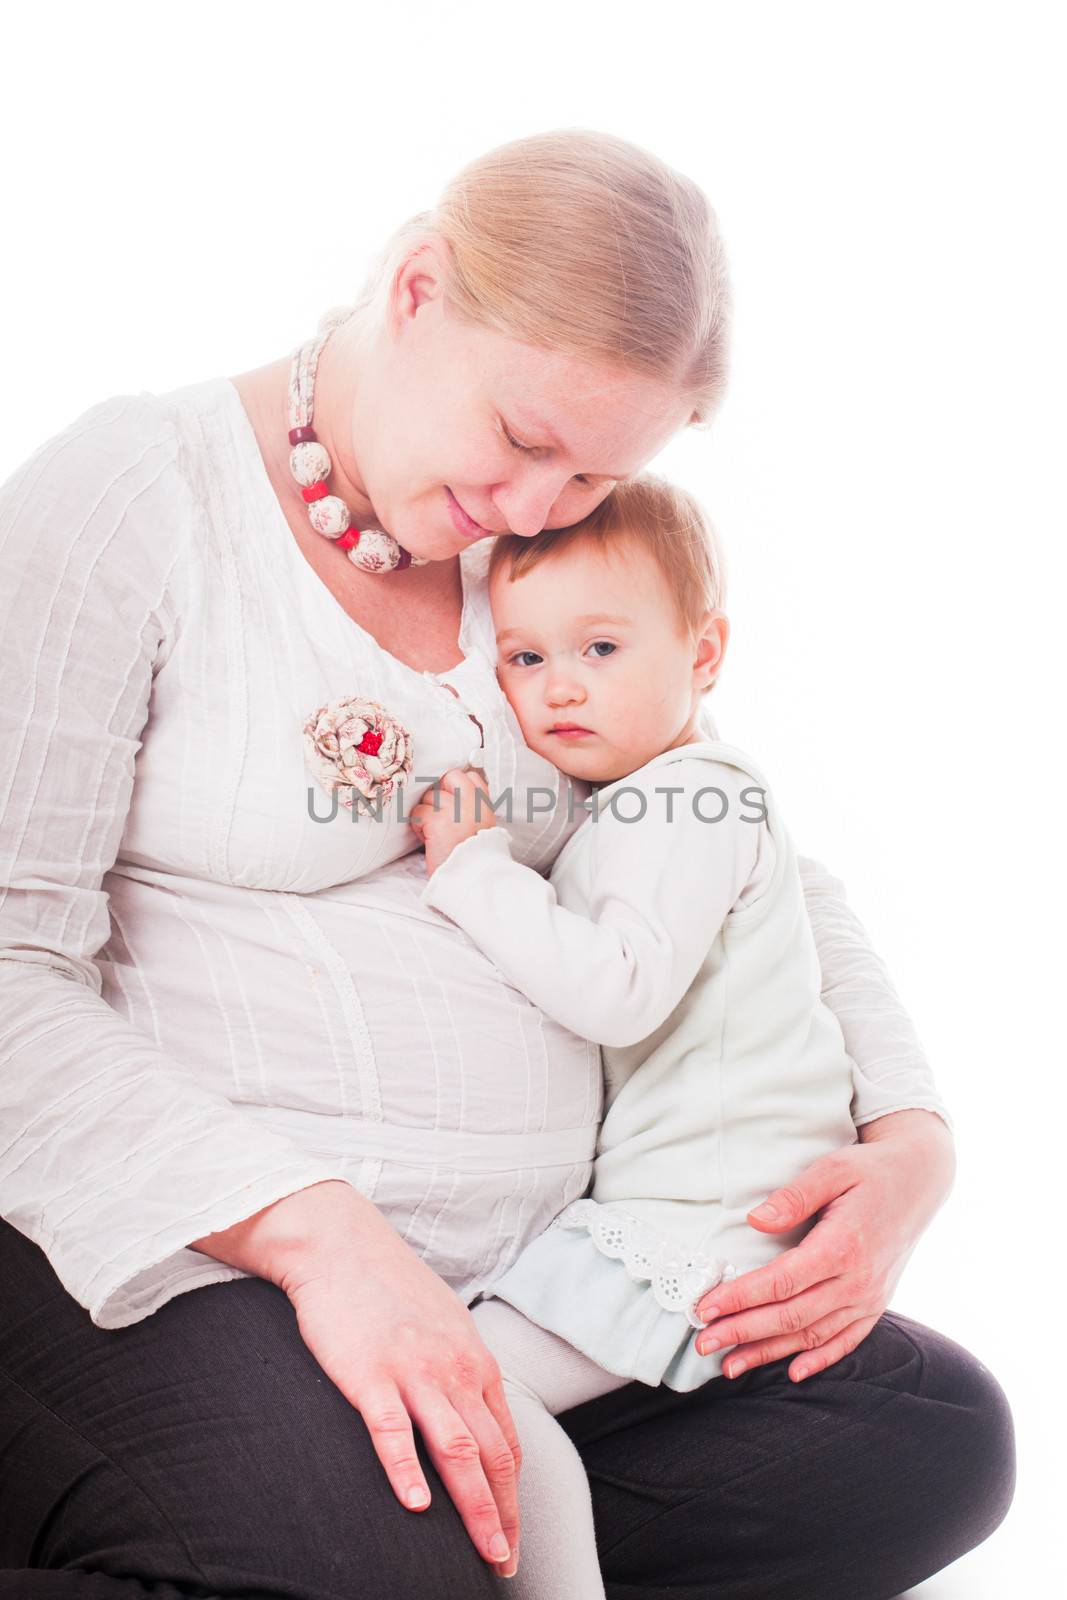 Pregnant woman with daughter close up isolated on white